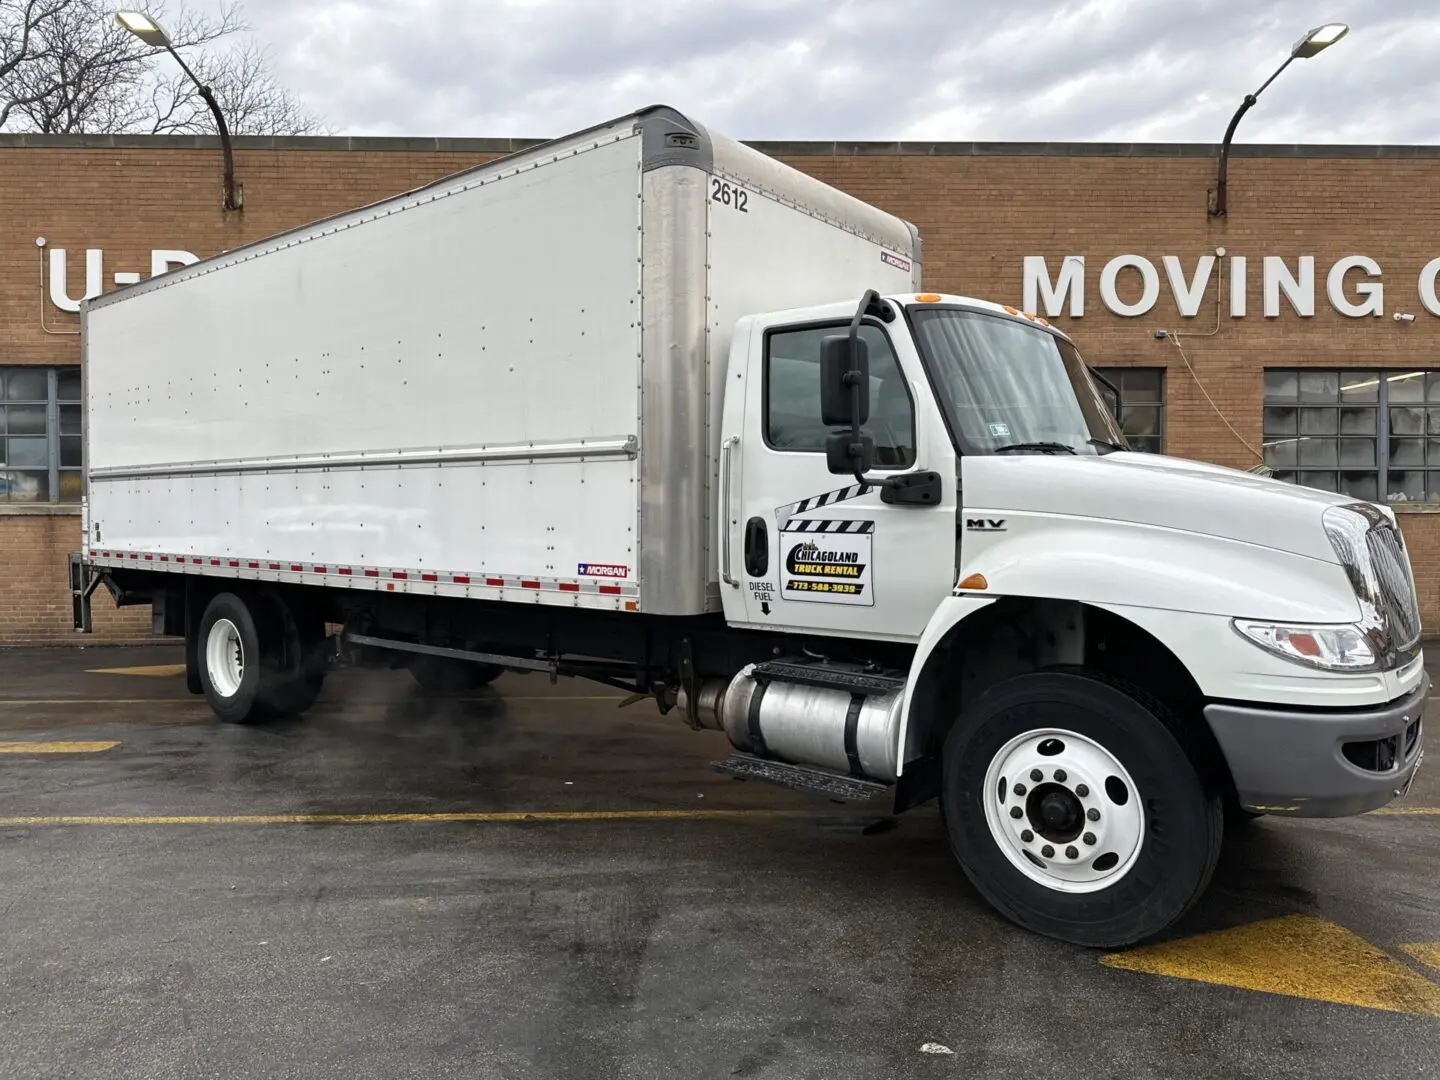 24 foot box truck rental in Chicago and nationwide